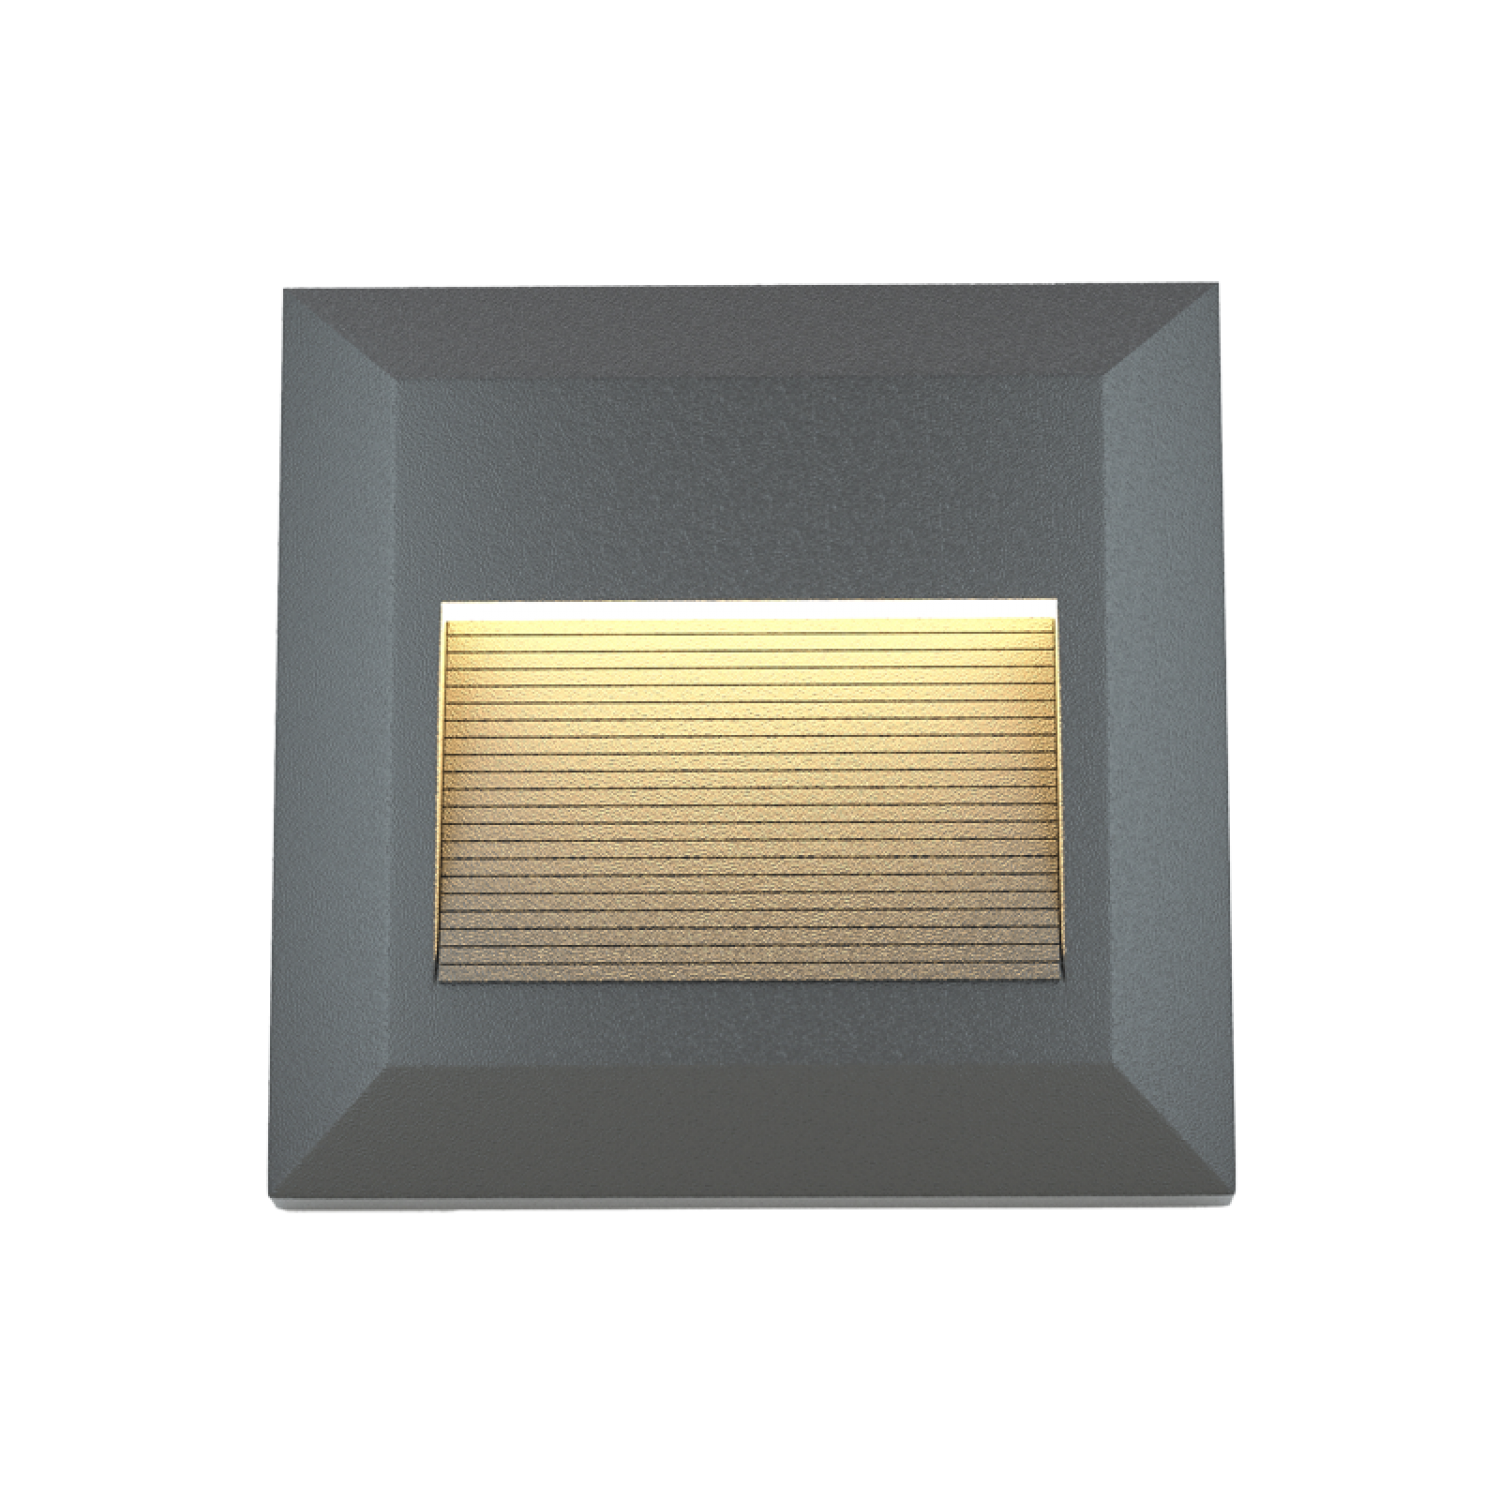 Salmon LED 2W 3CCT Outdoor Wall Lamp Anthracite CCT D:12.4cmx12.4cm (80201840)